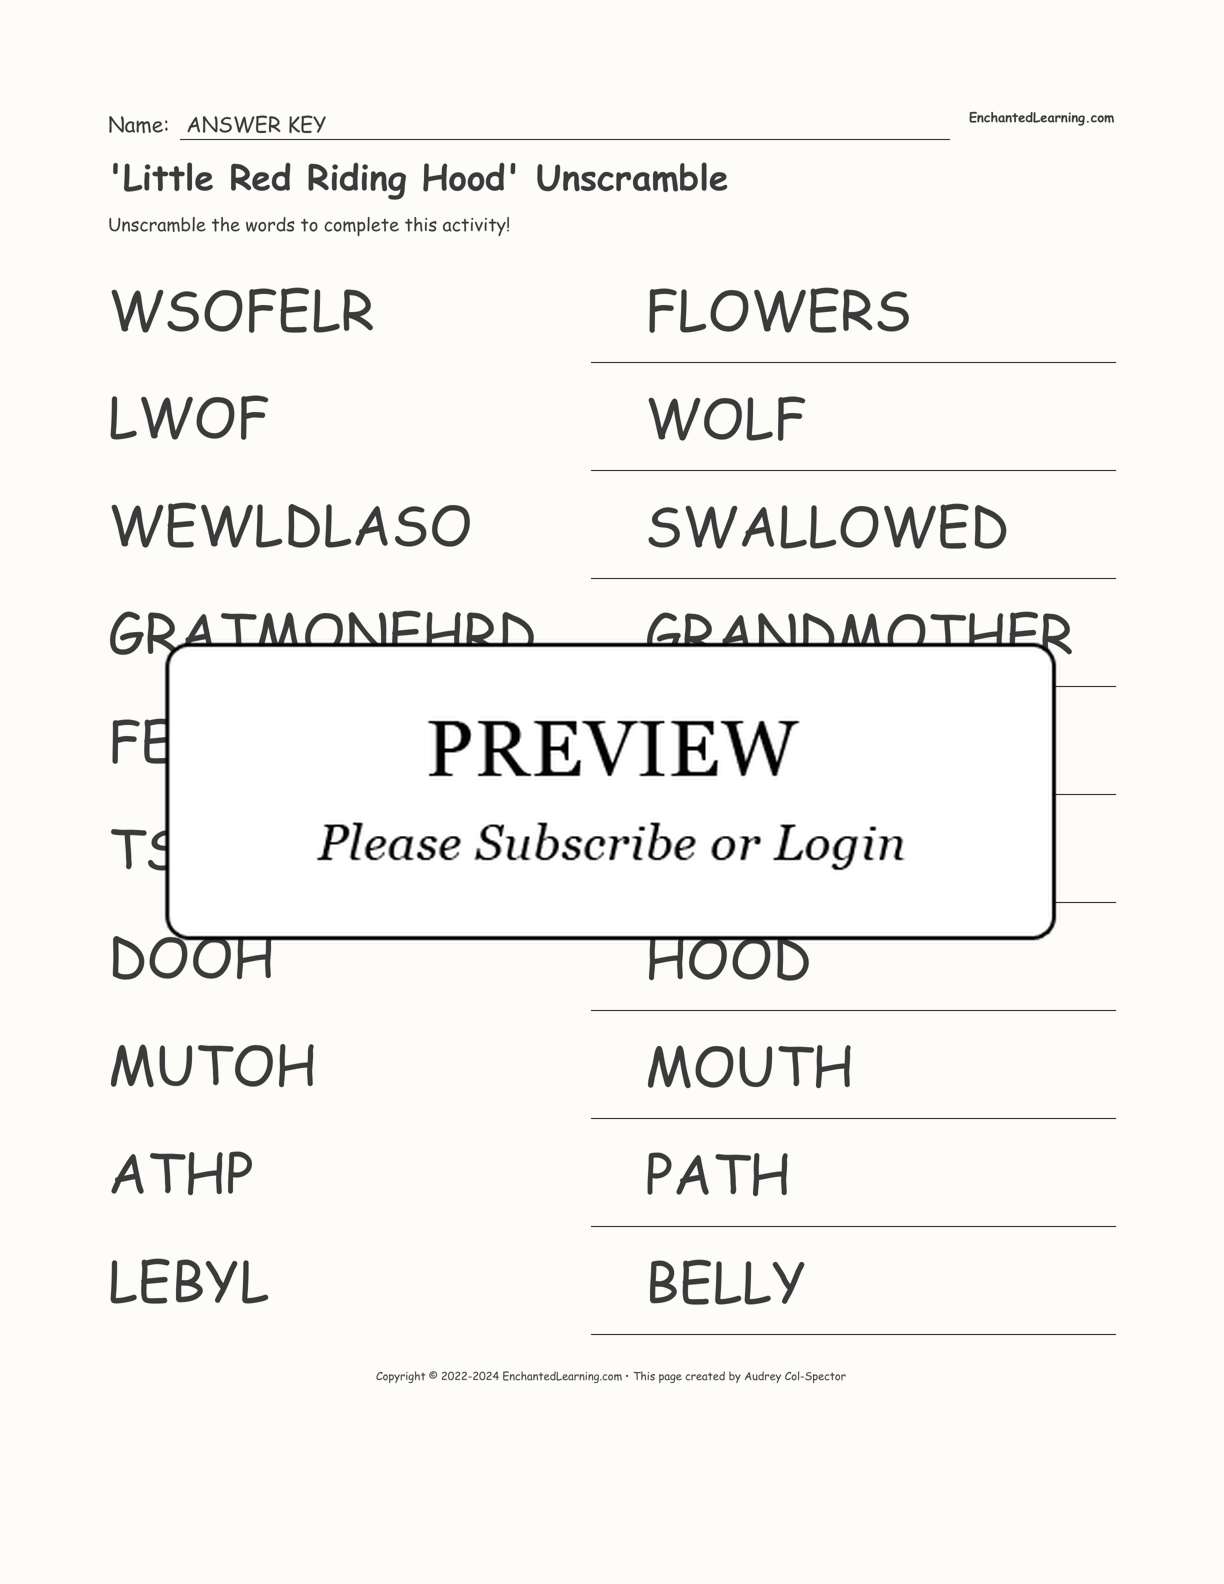 'Little Red Riding Hood' Unscramble interactive worksheet page 2